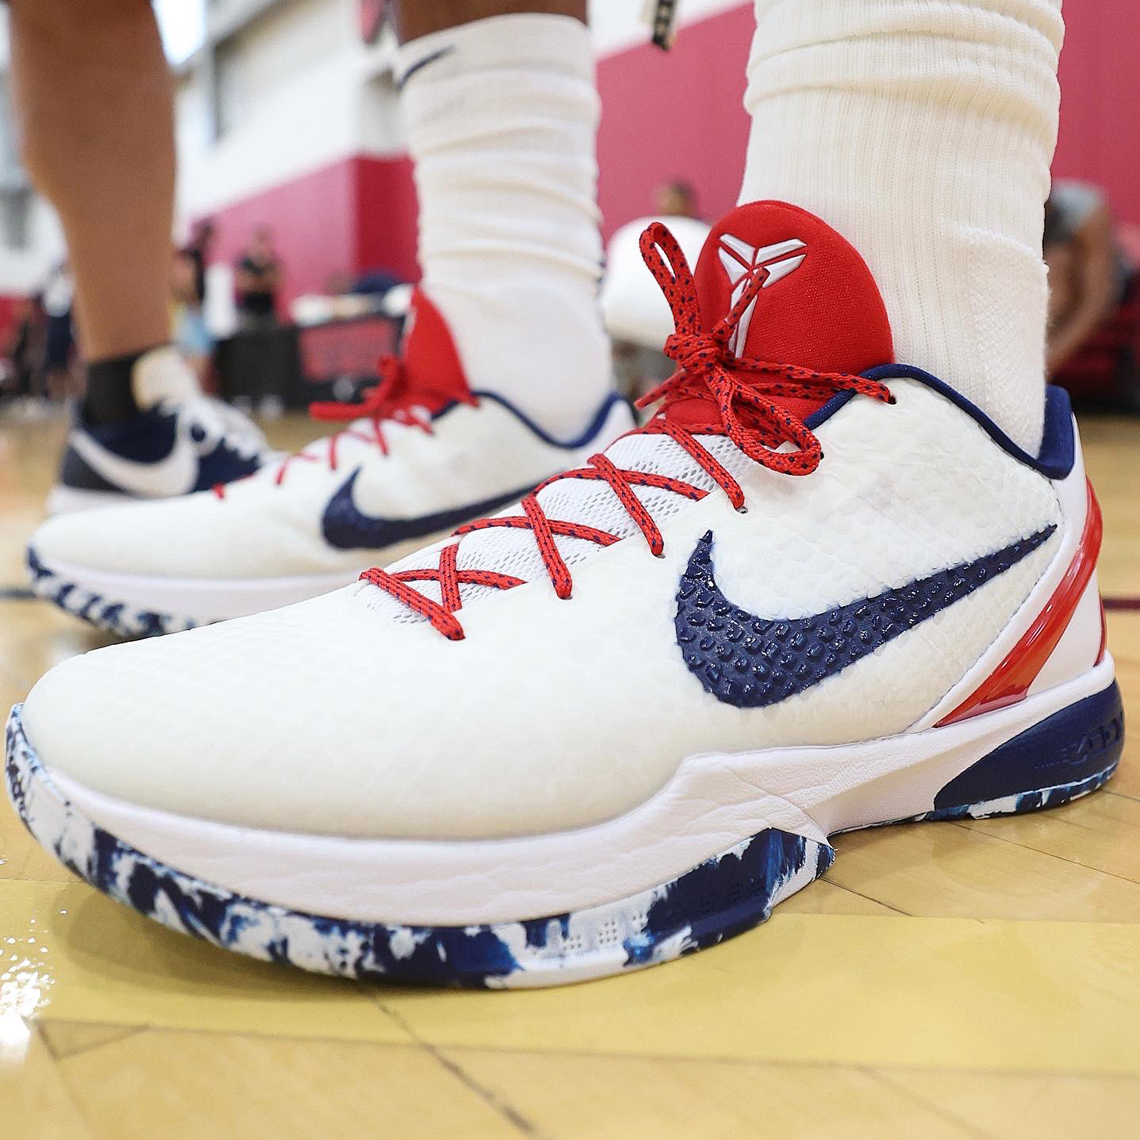 Team Usa Player Exclusive Sneakers | Sneakernews.Com